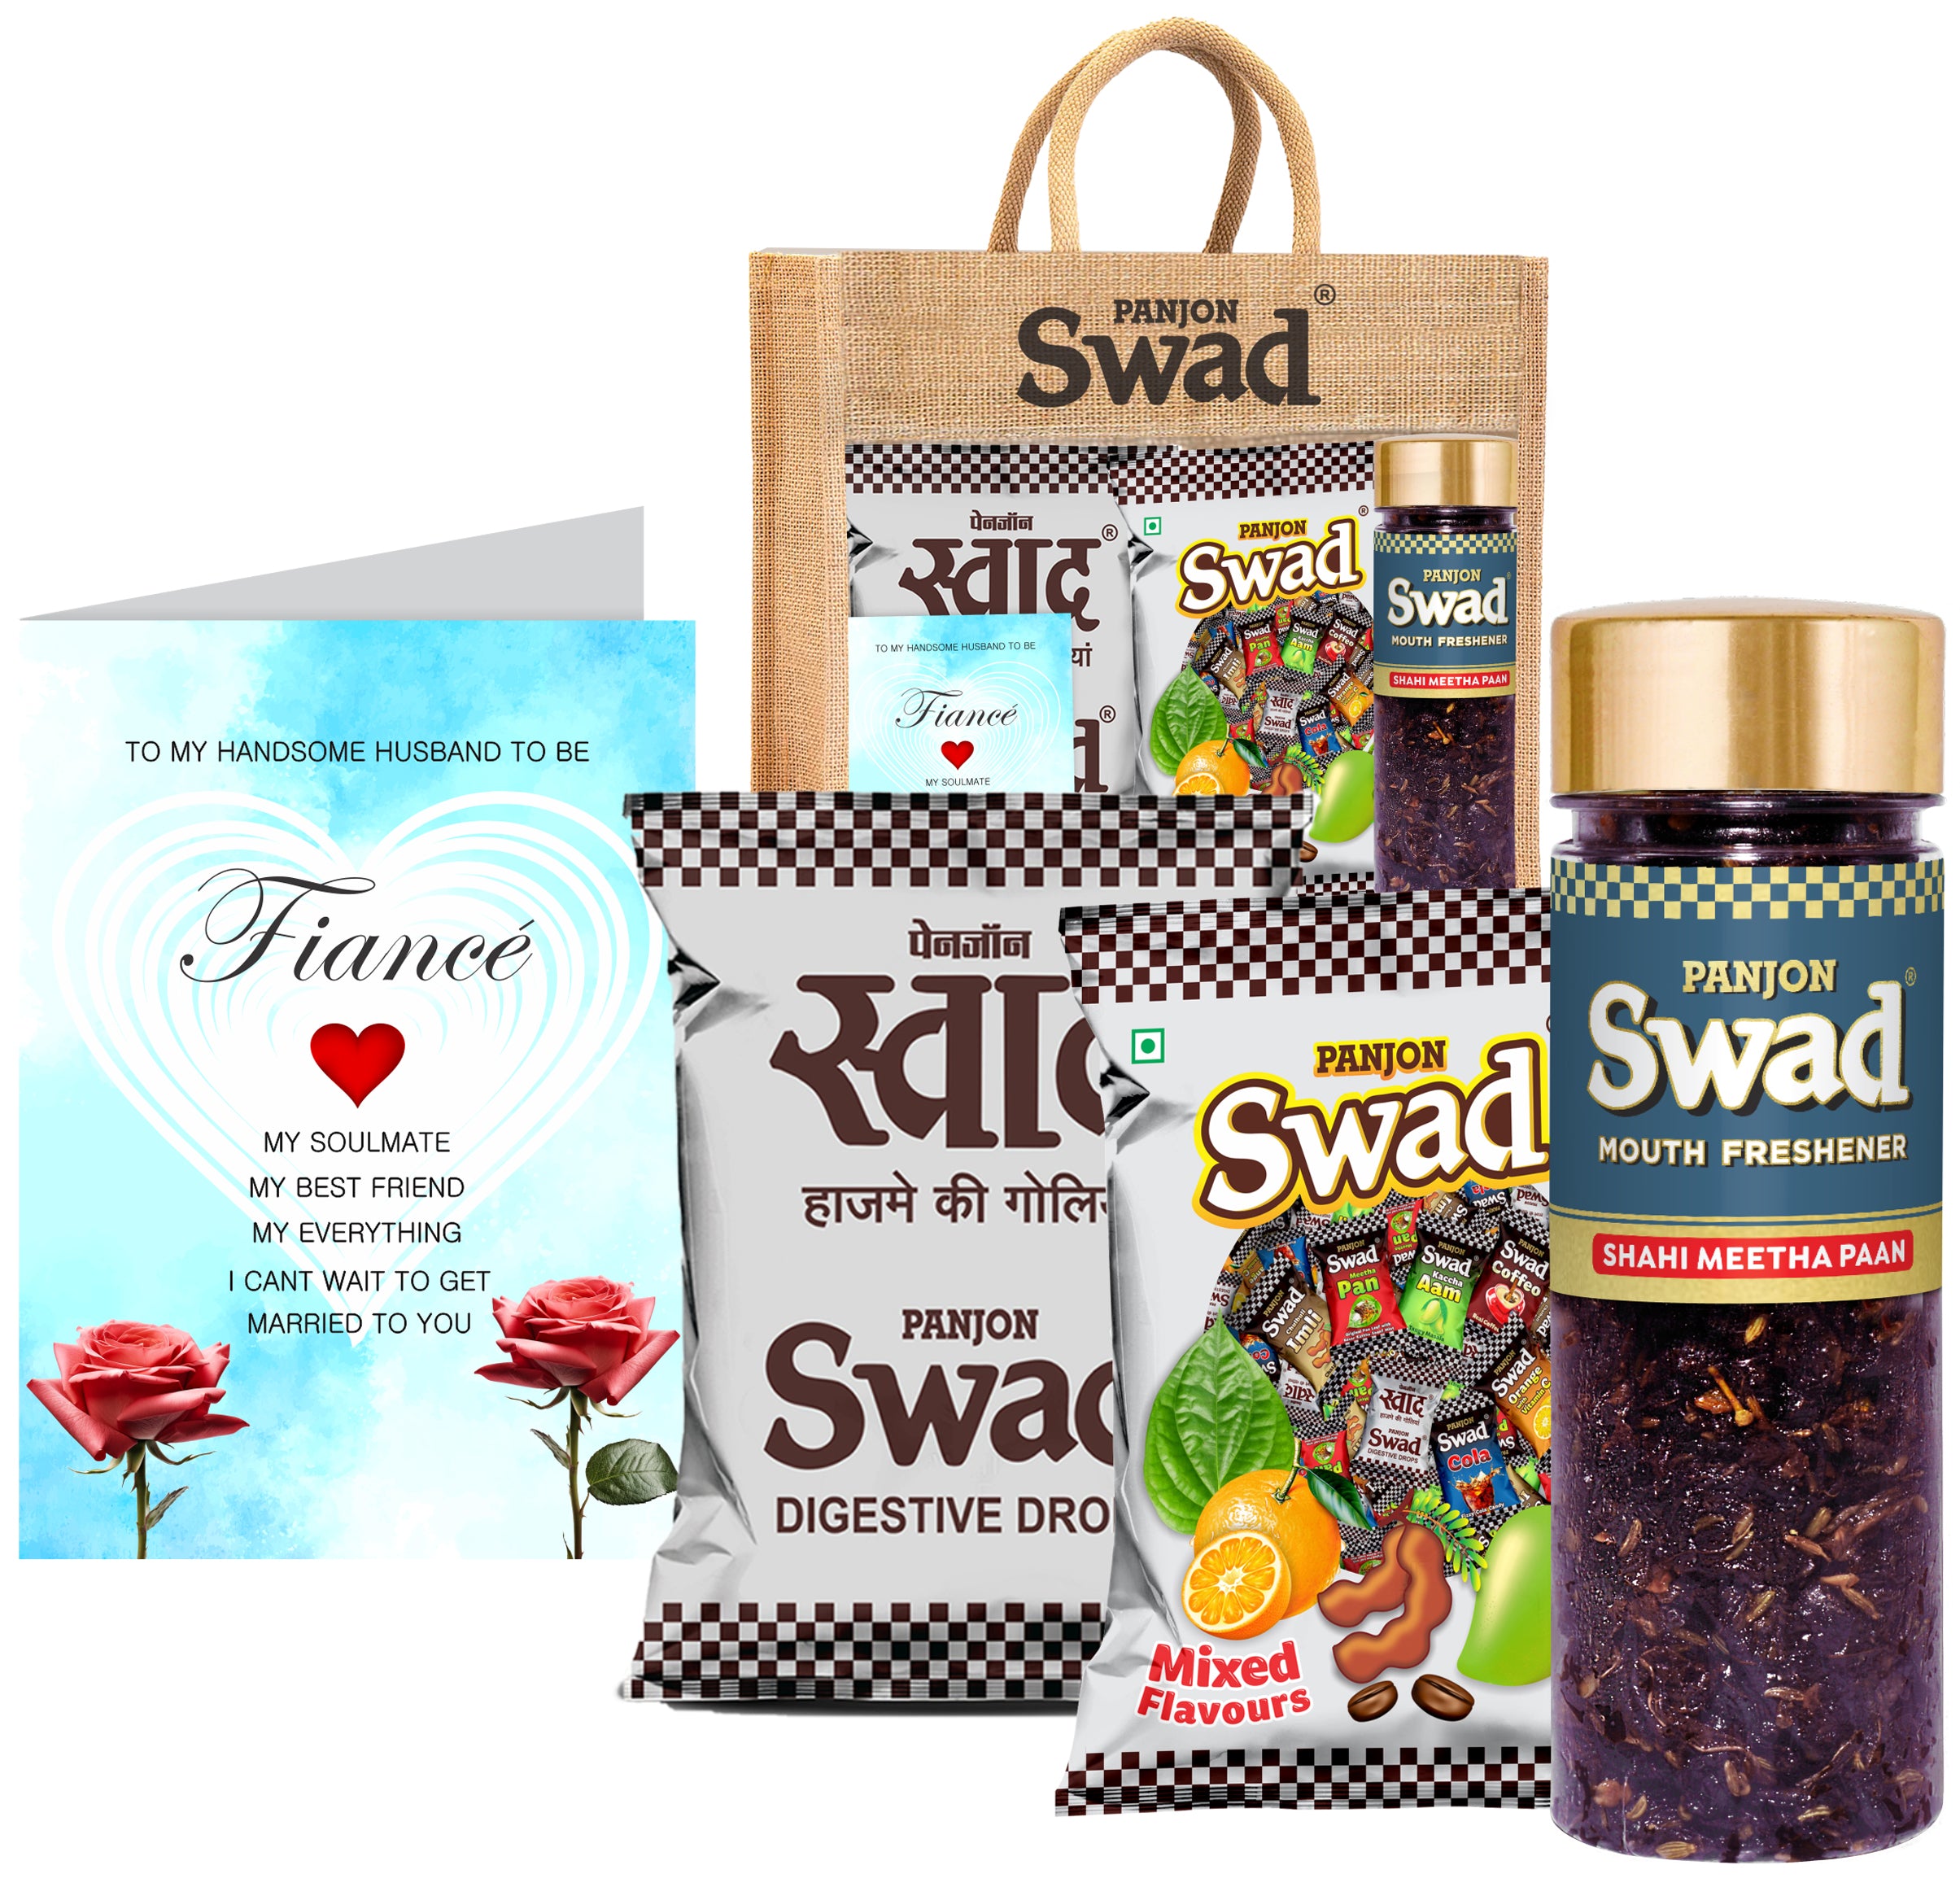 Swad Gift for Fiance male/Husband to be with Card (25 Swad Candy, 25 Mixed Toffee, Shahi Meetha Paan Mix Mukhwas) in Jute Bag